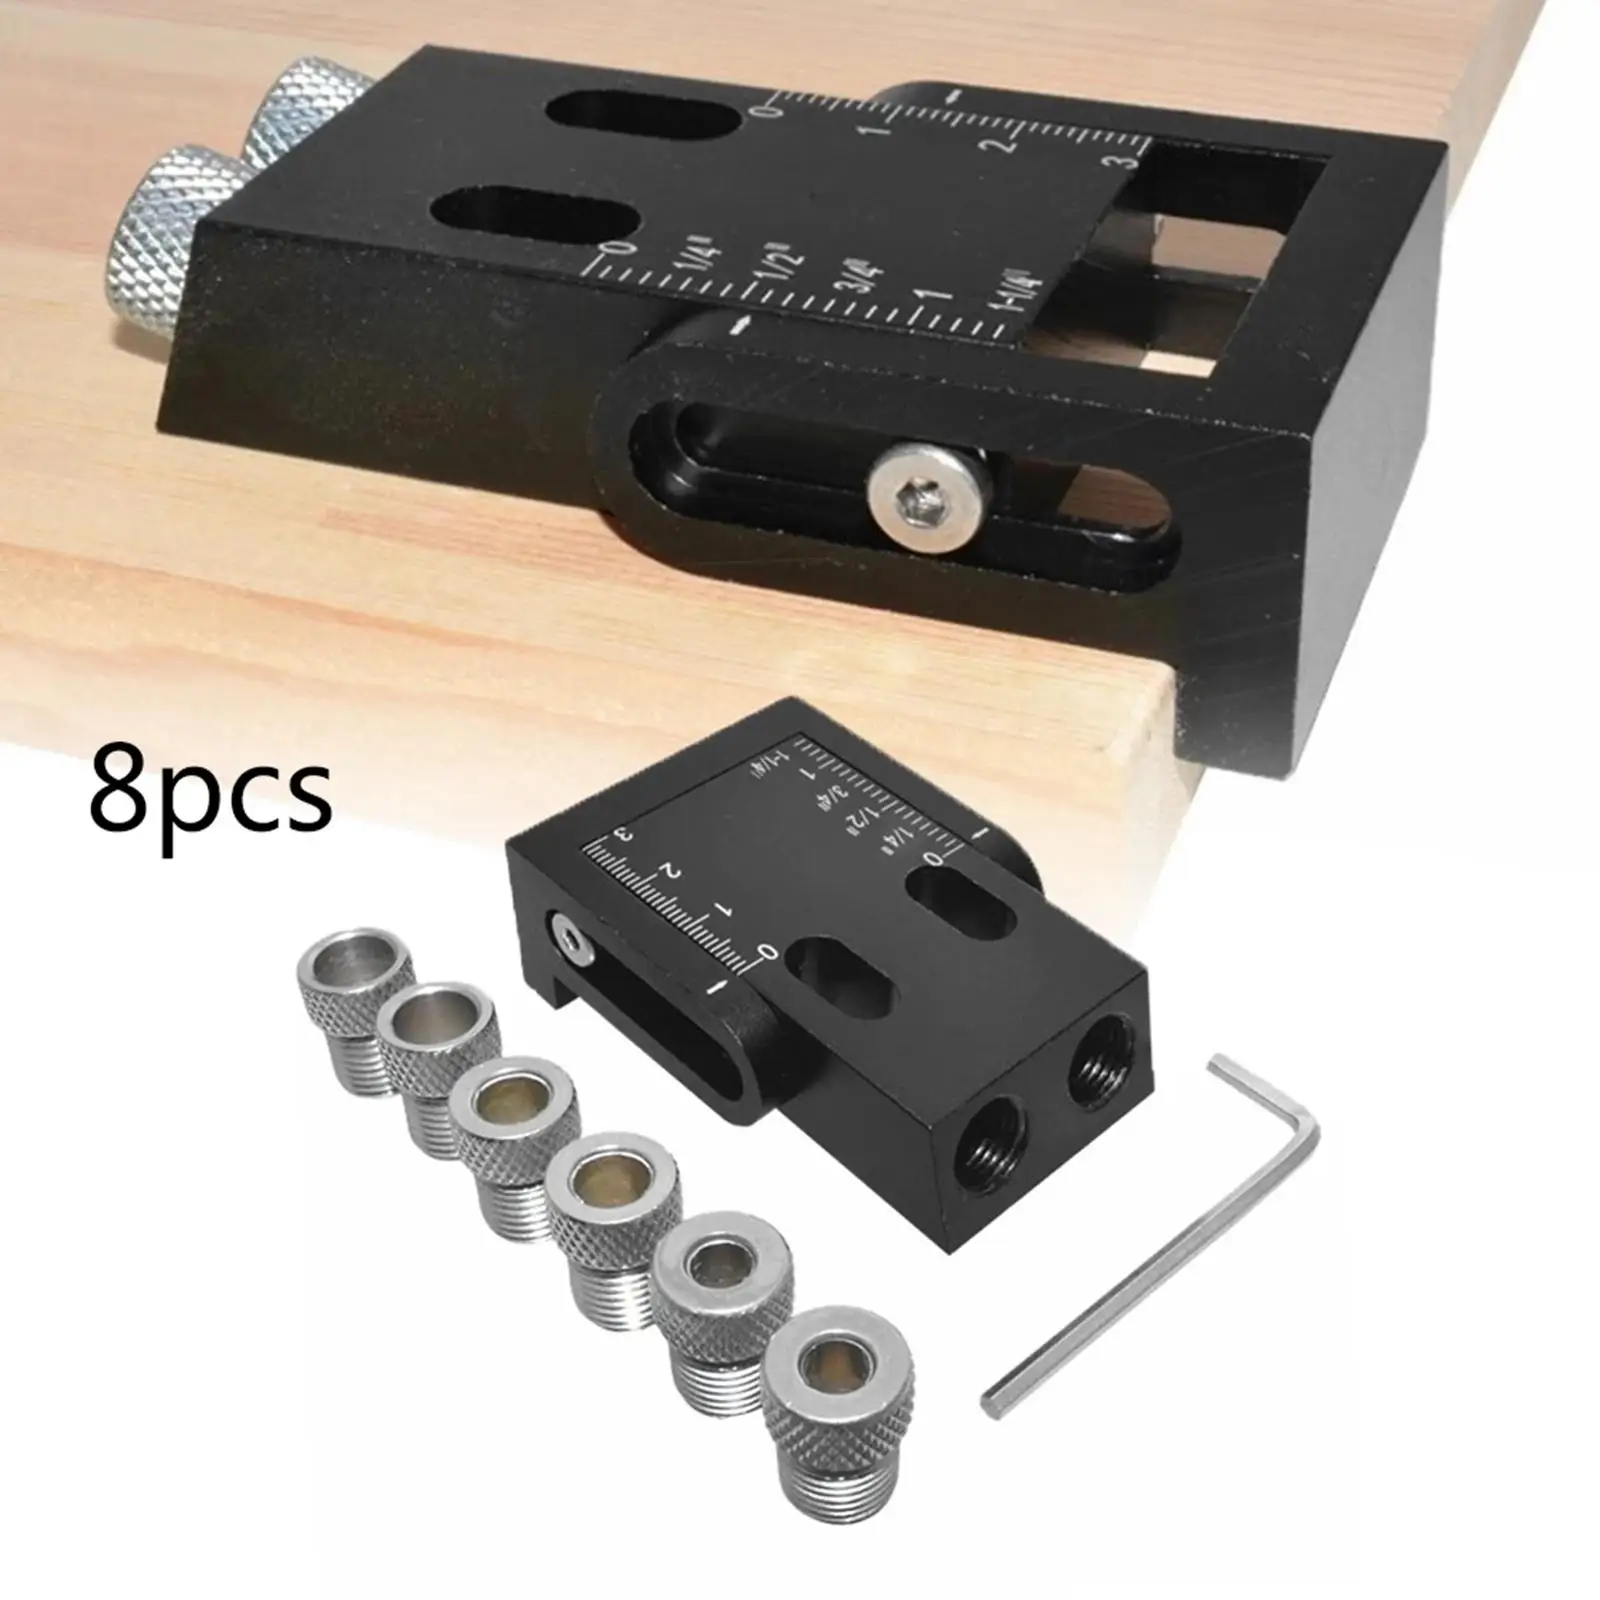 Pocket Hole Jig Kit 6/8 /10mm Angle Drill Guide Set Hole Puncher Locator Jig Drill Bit Set Puncher DIY For Woodworking Tools